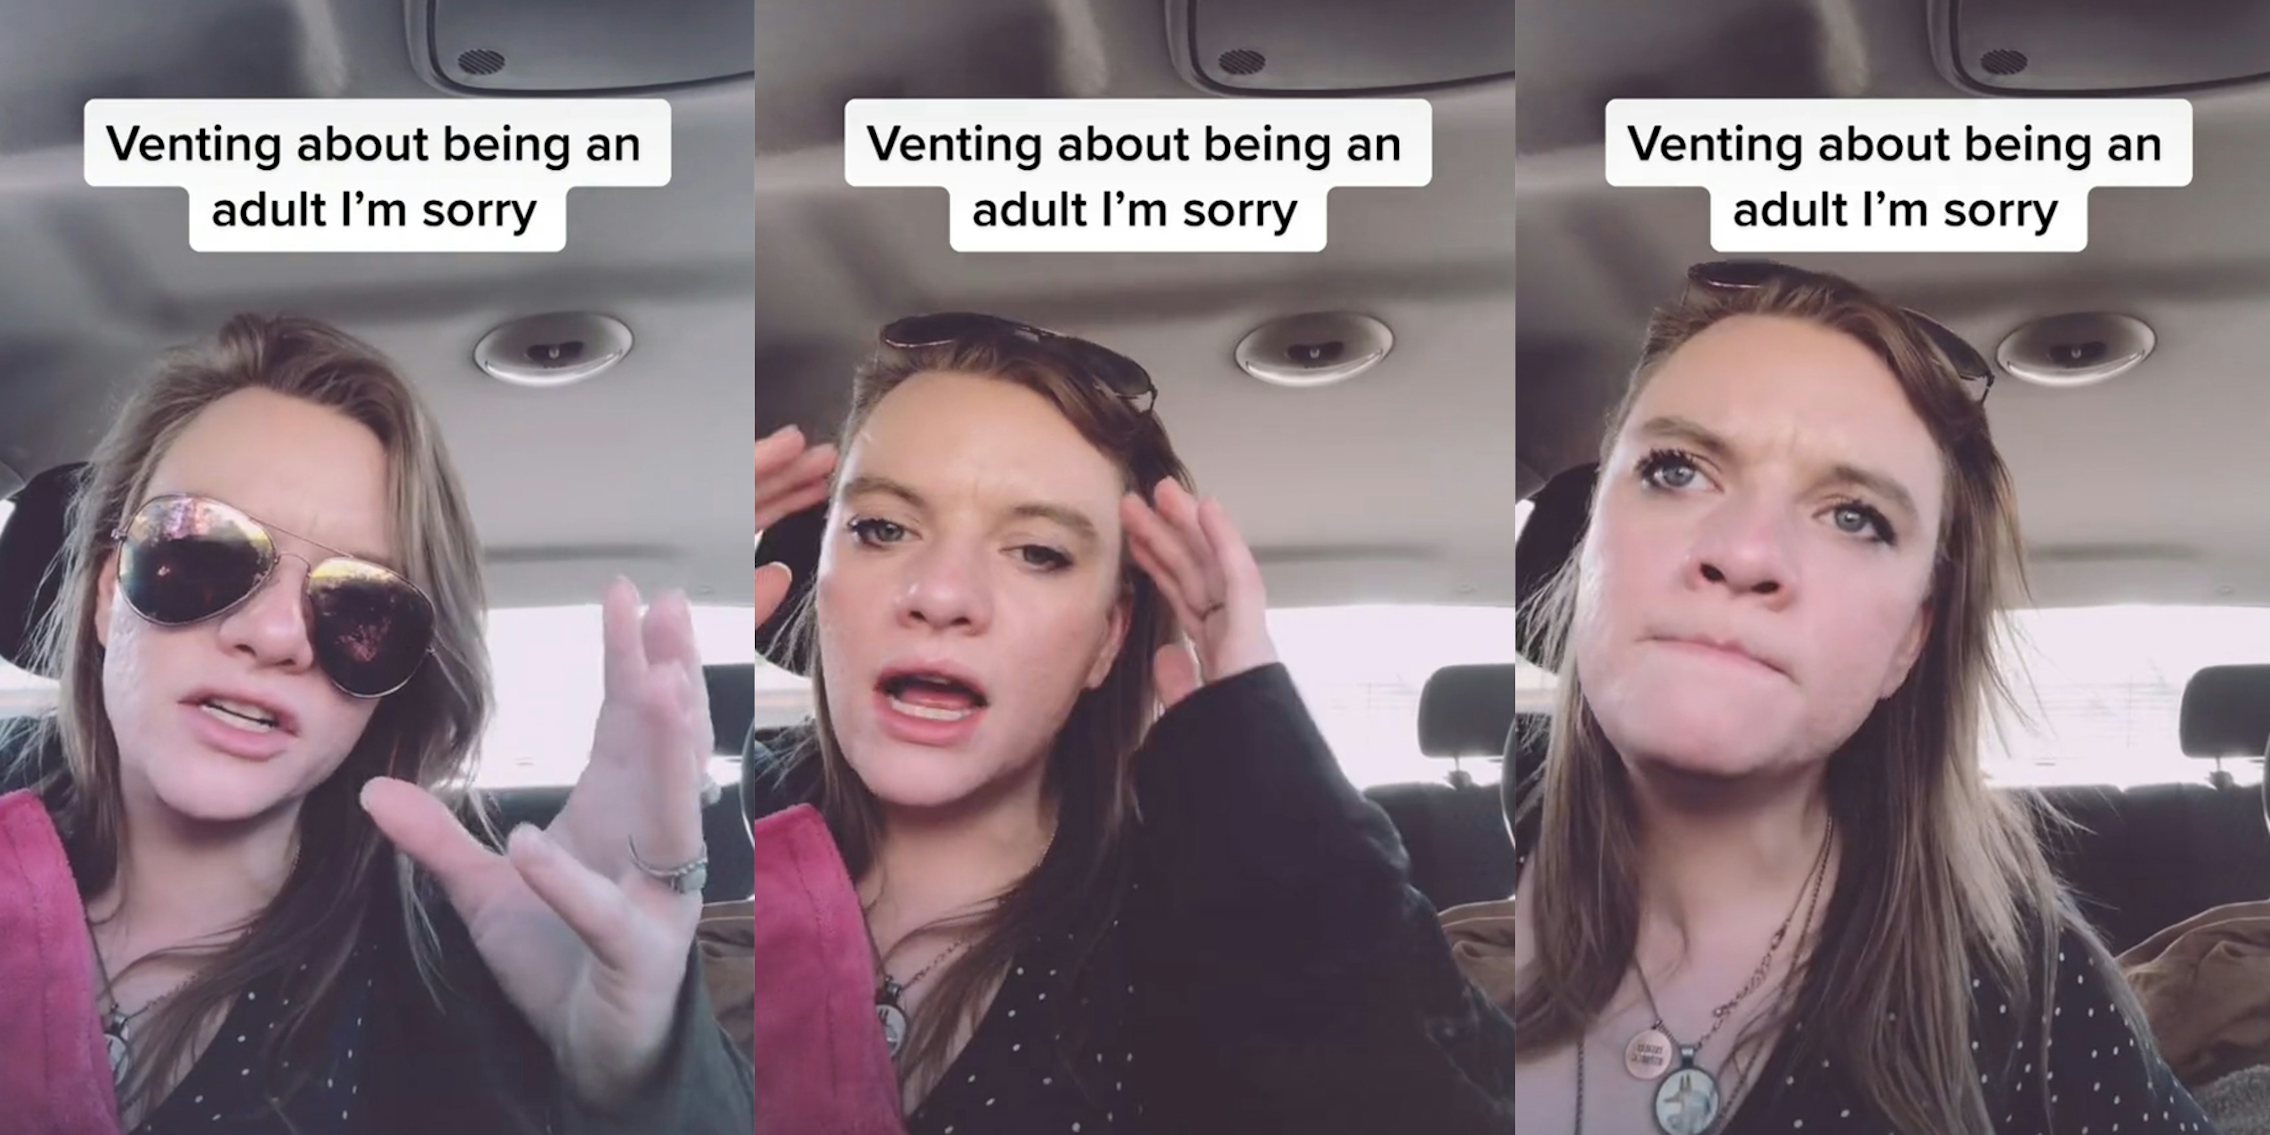 woman in car, removing sunglasses in frustration with caption 'Venting about being an adult I'm sorry'